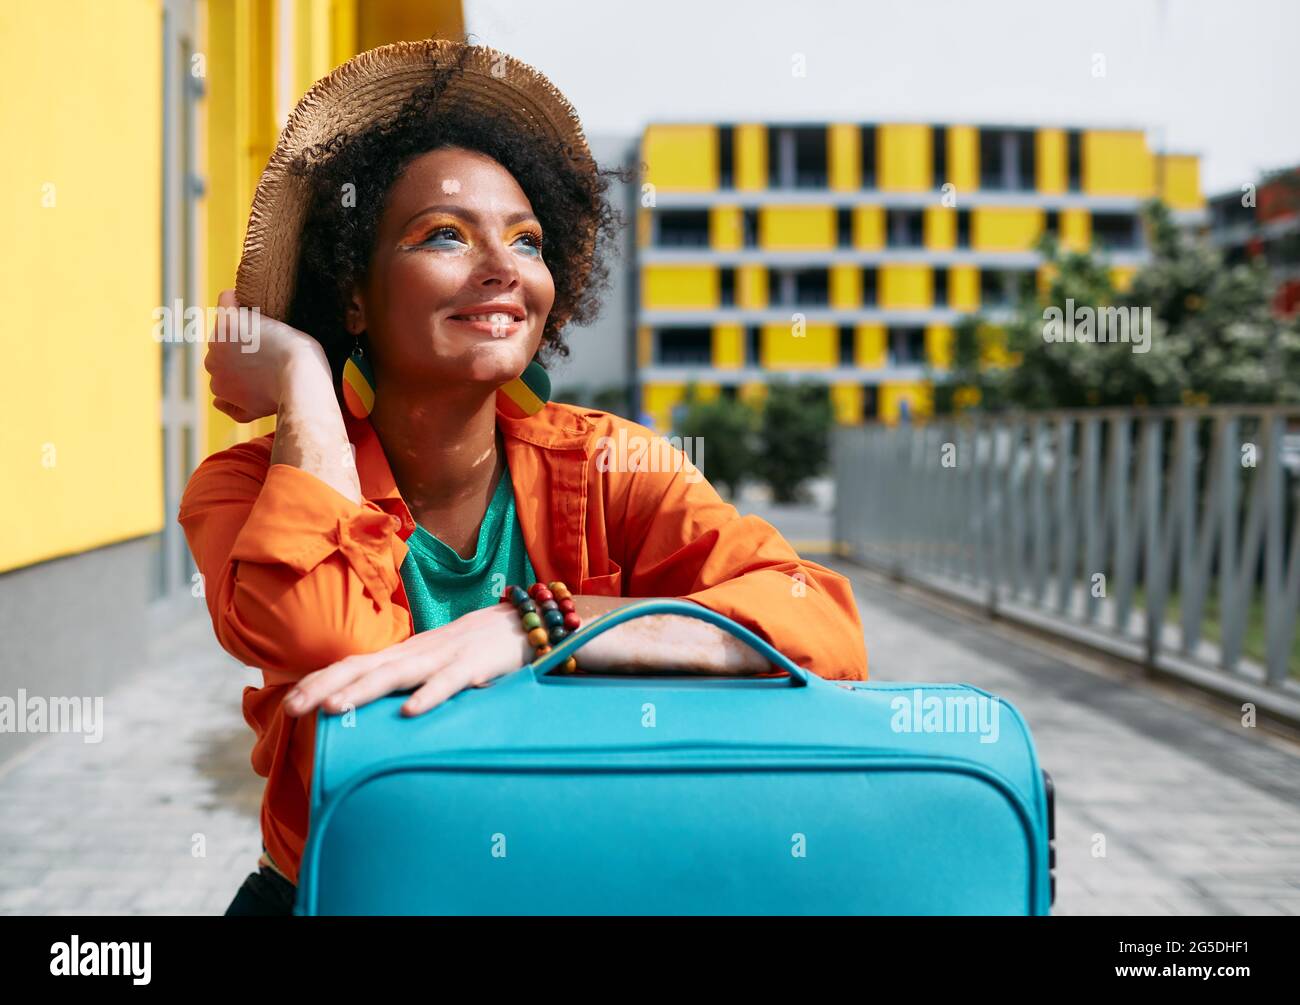 Fun multi-ethnic woman with bright makeup and colored clothes with a suitcase travels through beautiful urban places Stock Photo